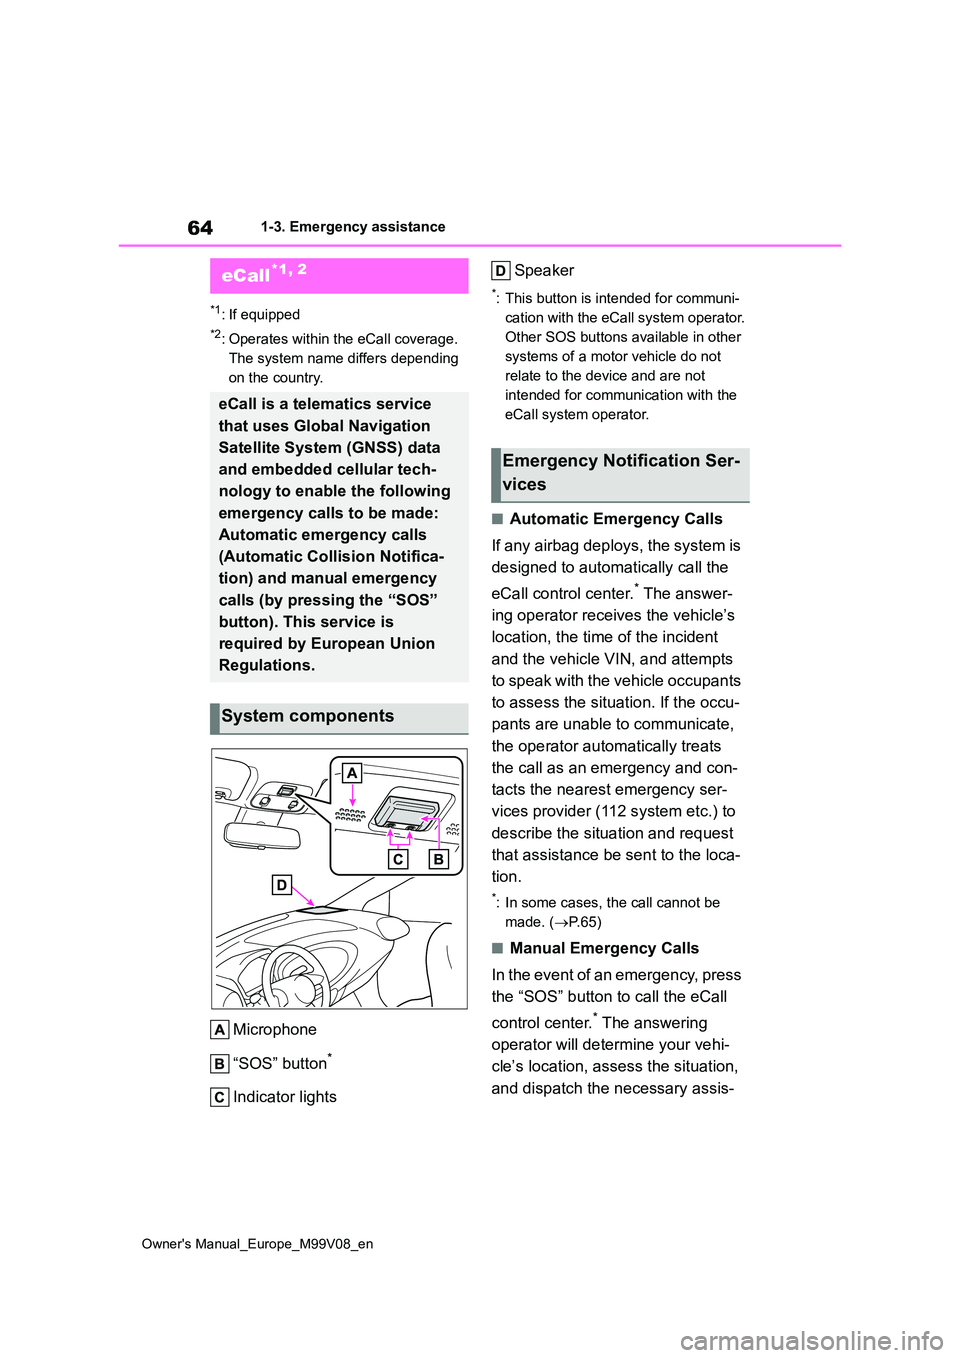 TOYOTA AYGO X 2022  Owners Manual (in English) 64
Owner's Manual_Europe_M99V08_en
1-3. Emergency assistance
1-3.Emerg ency  as sista nce
*1: If equipped
*2: Operates within the eCall coverage.  
The system name differs depending 
on the countr